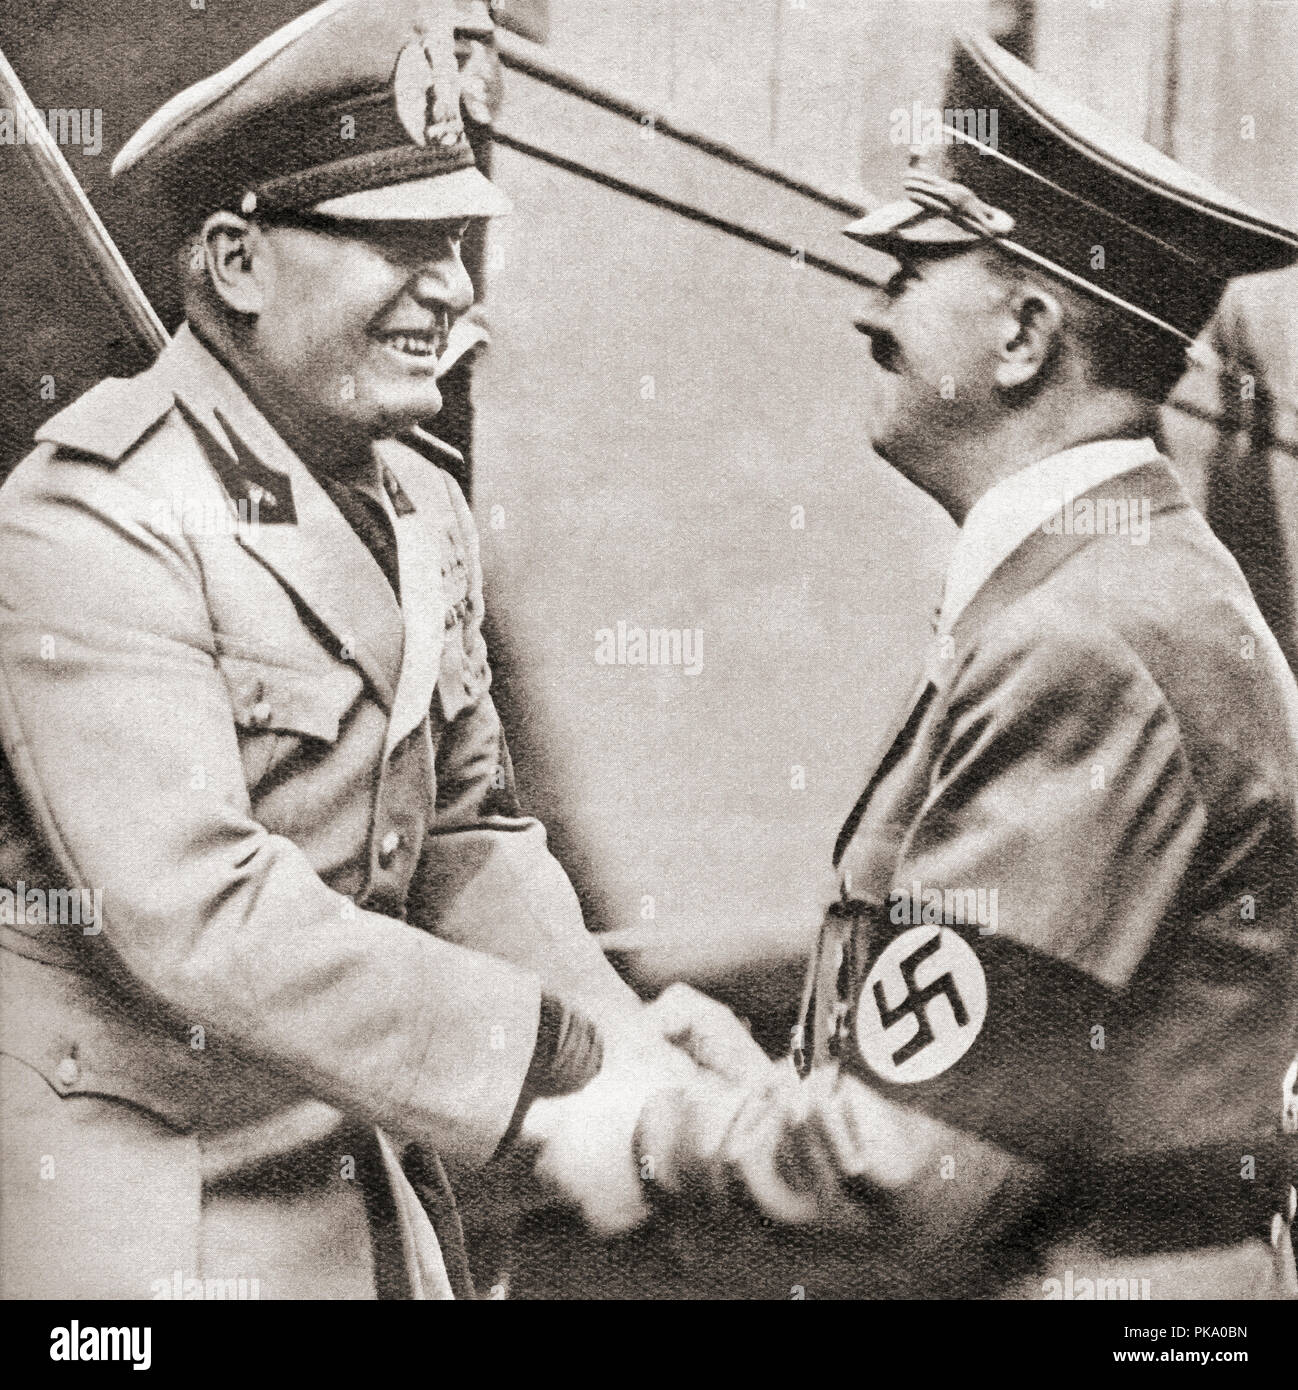 Adolf Hitler, right, welcomes Benito Mussolini in Kufstein, Austria on the occasion of the Munich Conference, 1938.   Adolf Hitler,1889 – 1945. German politician, demagogue, Pan-German revolutionary, leader of the Nazi Party, Chancellor of Germany, and Führer of Nazi Germany from 1934 to 1945.  Benito Amilcare Andrea Mussolini, 1883 – 1945.  Italian politician, journalist, leader of the National Fascist Party and Italian Prime Minister from 1922 to 1943.  From These Tremendous Years, published 1938. Stock Photo